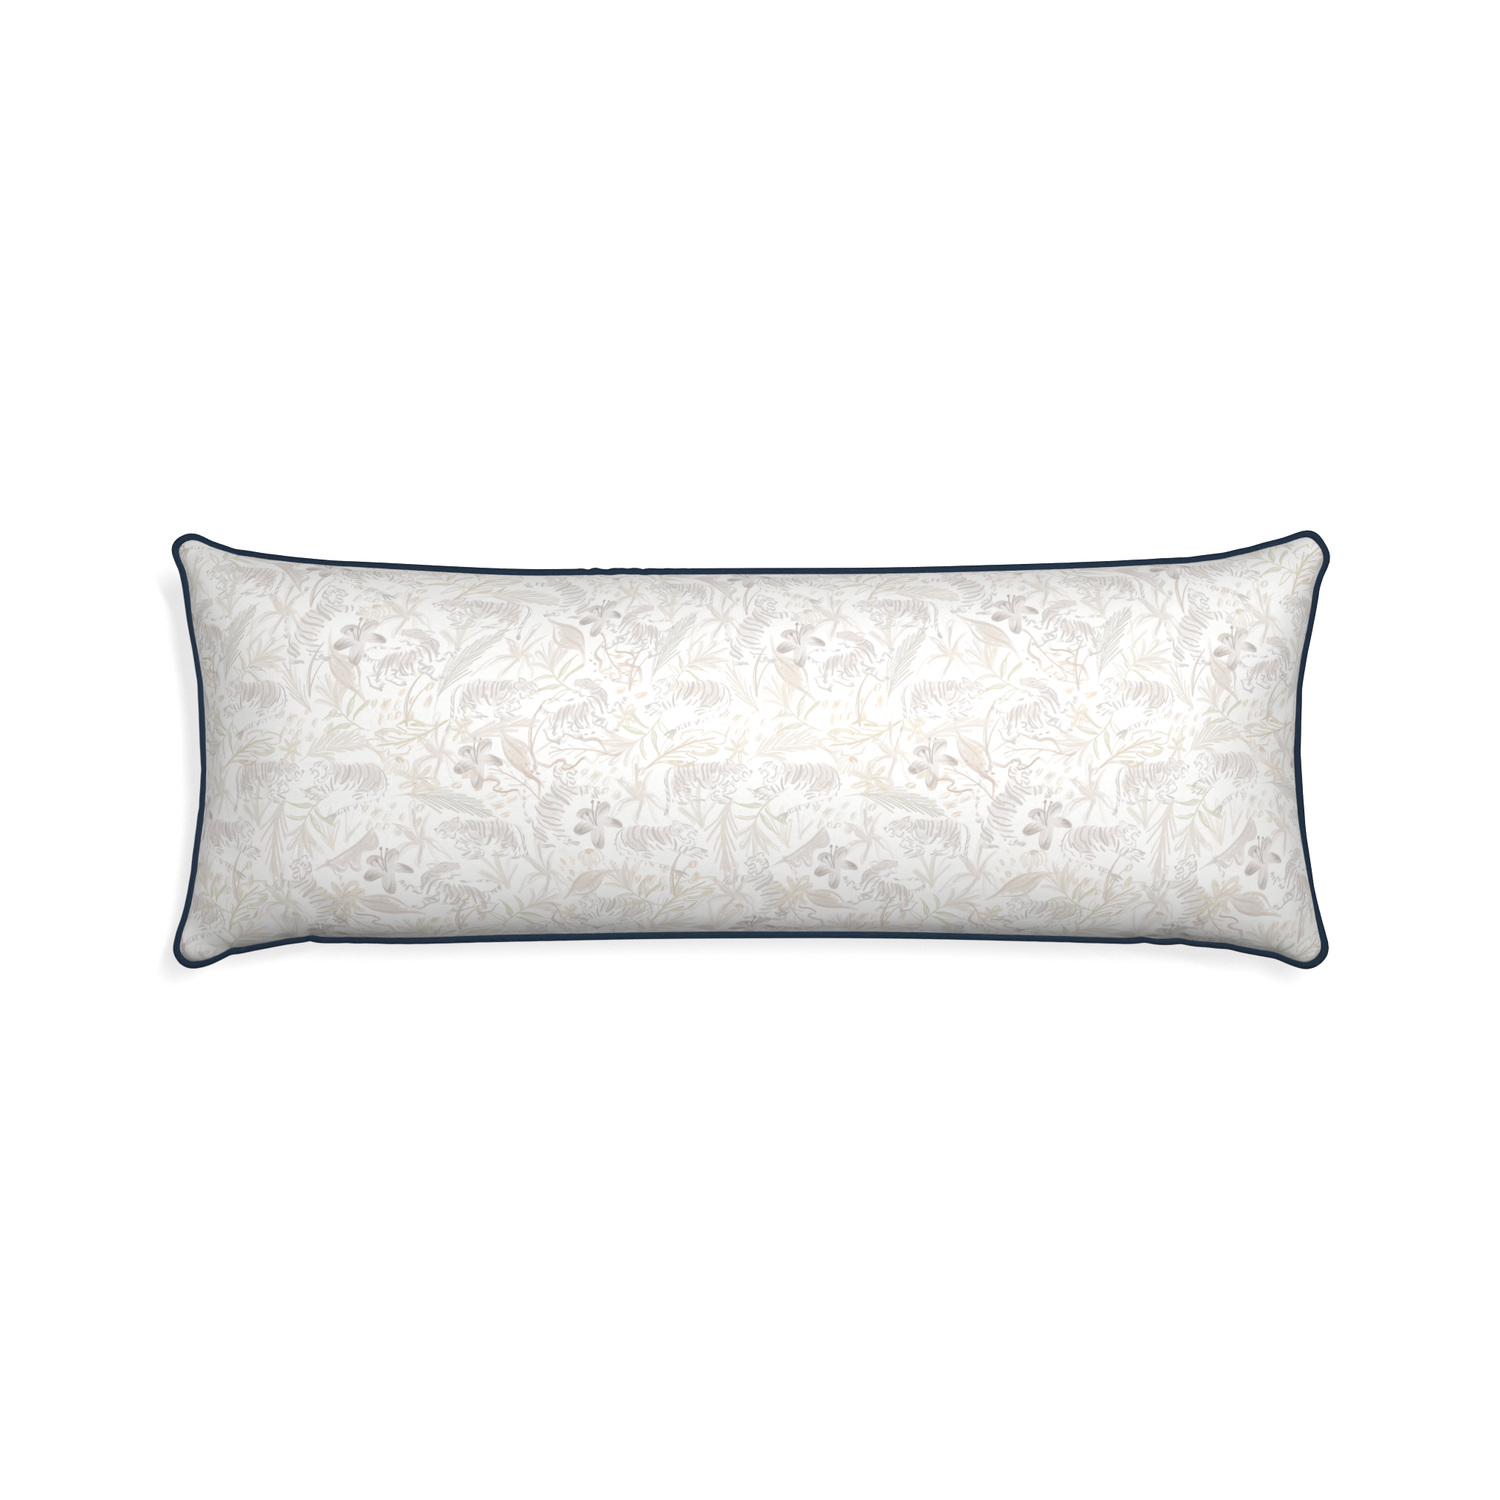 Xl-lumbar frida sand custom beige chinoiserie tigerpillow with c piping on white background